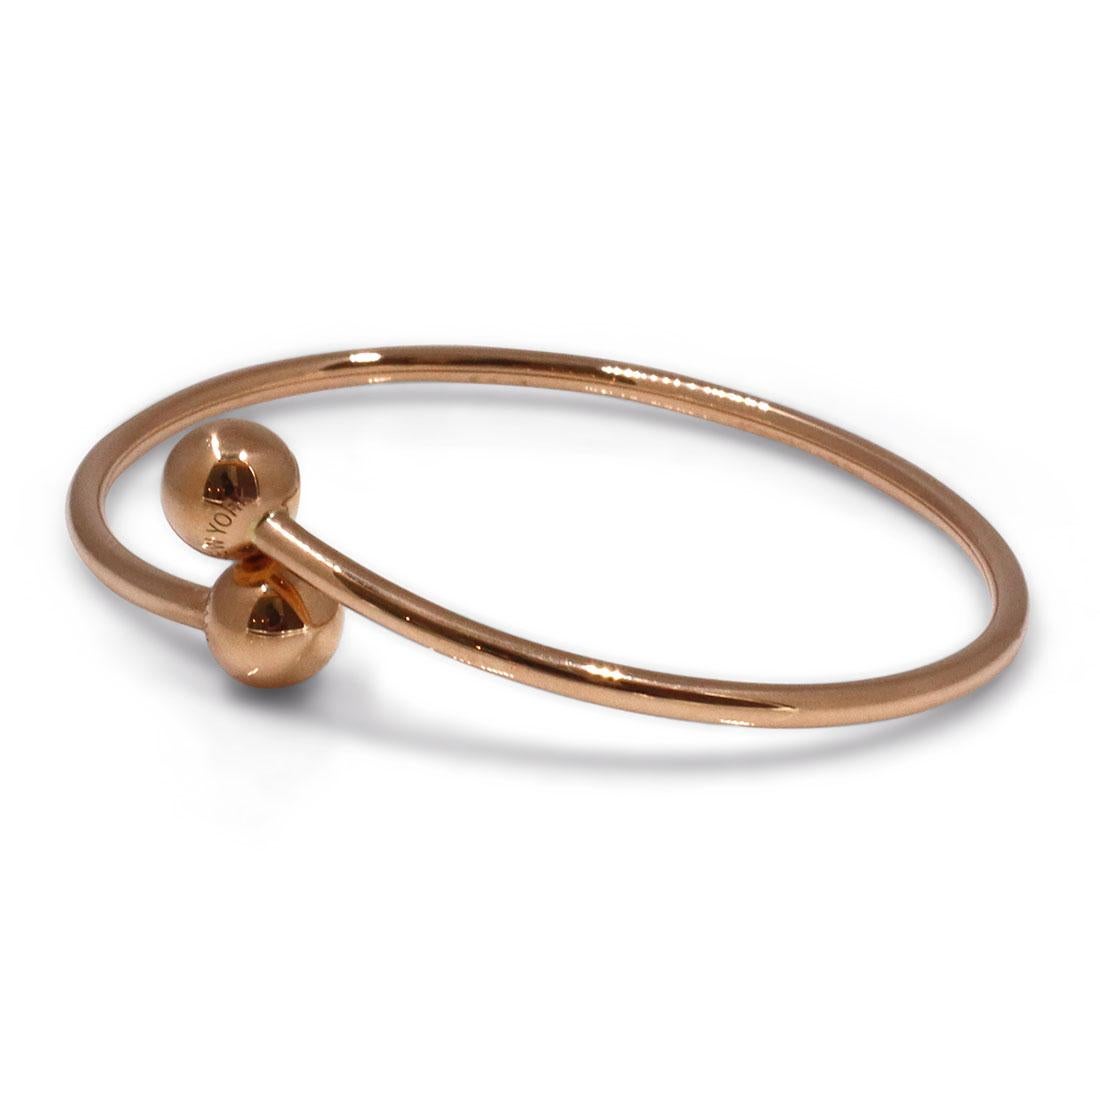 Authentic Tiffany & Co. 'HardWear Ball Bypass' bangle bracelet crafted in 18 karat rose gold. Will fit up to 6 1/2 inch wrist. Signed Tiffany & Co., Au750, ITALY on the base of the bangle and 'TIFFANY & CO', 'NEW YORK' on the ball ends. The bracelet